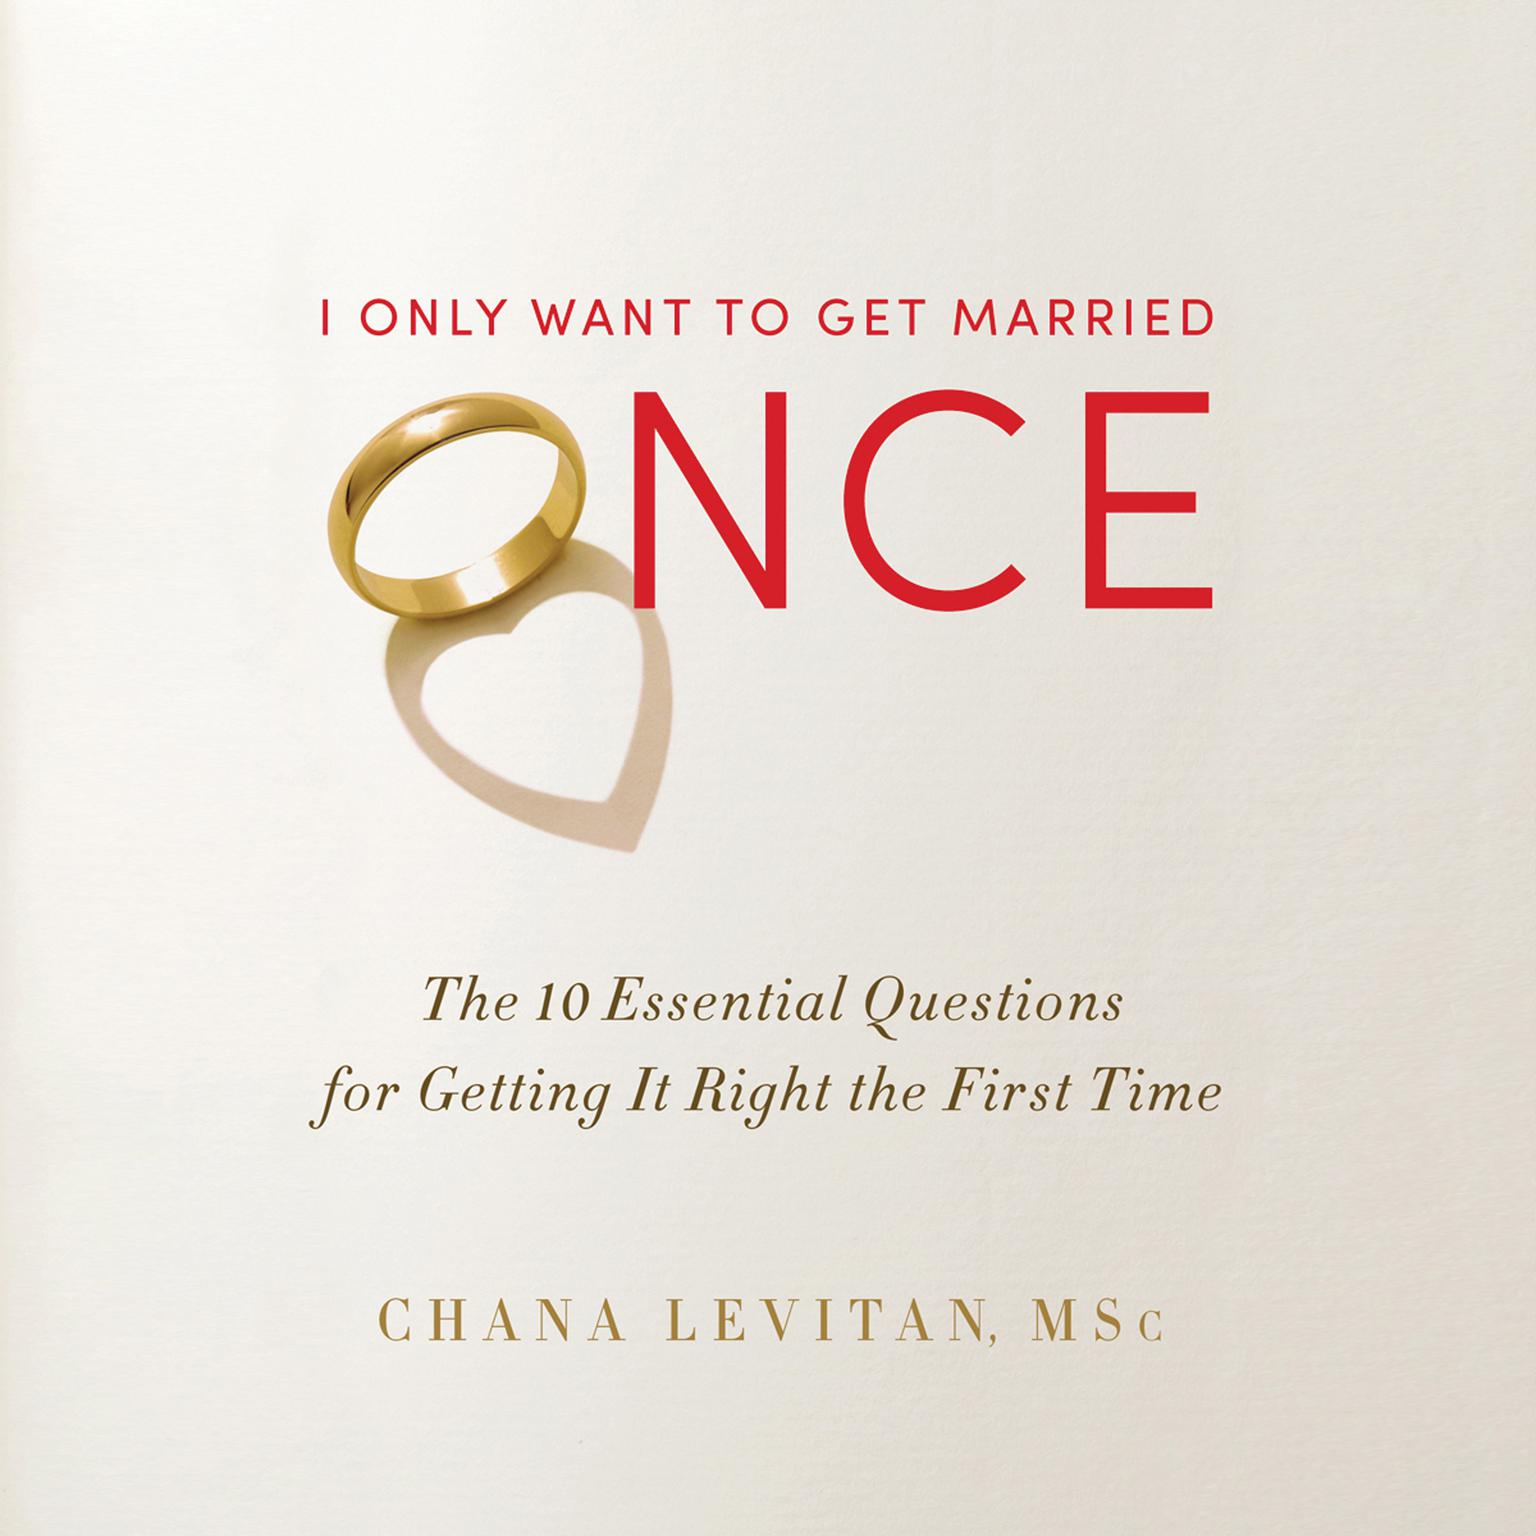 I Only Want to Get Married Once: The 10 Essential Questions for Getting It Right the First Time Audiobook, by Chana Levitan